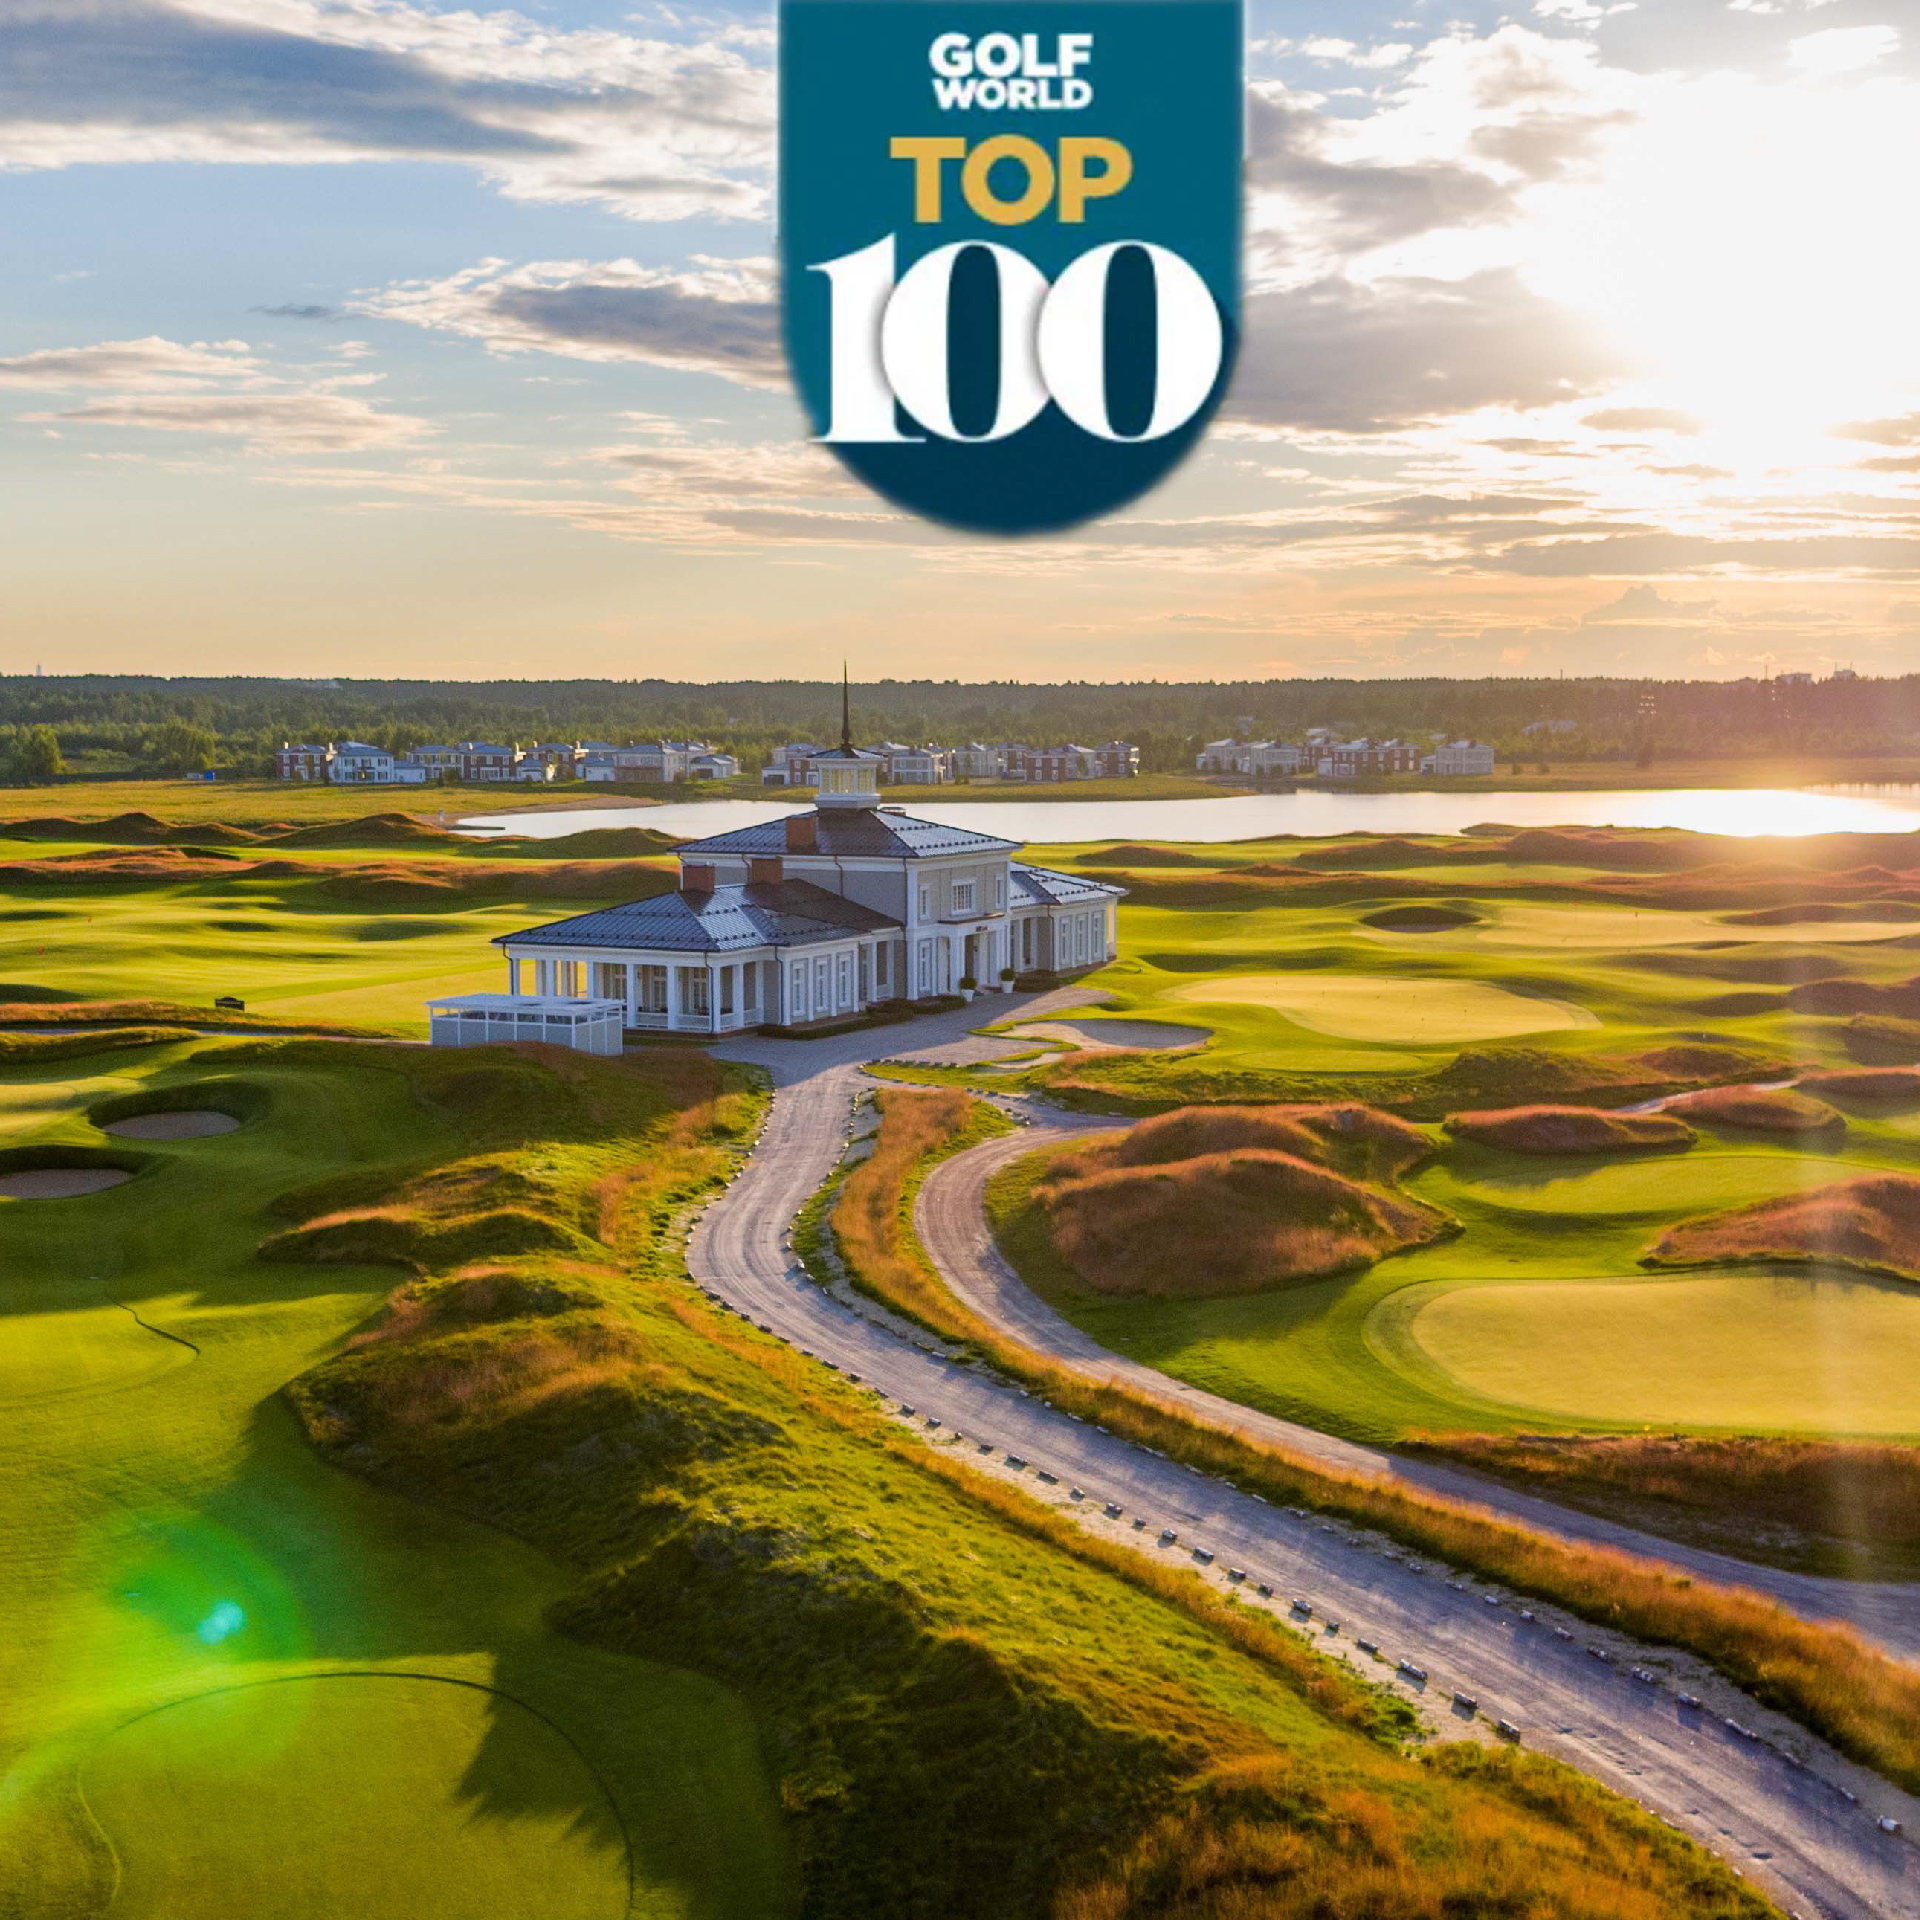 Golf World Top 100: Best New Golf Courses in Europe